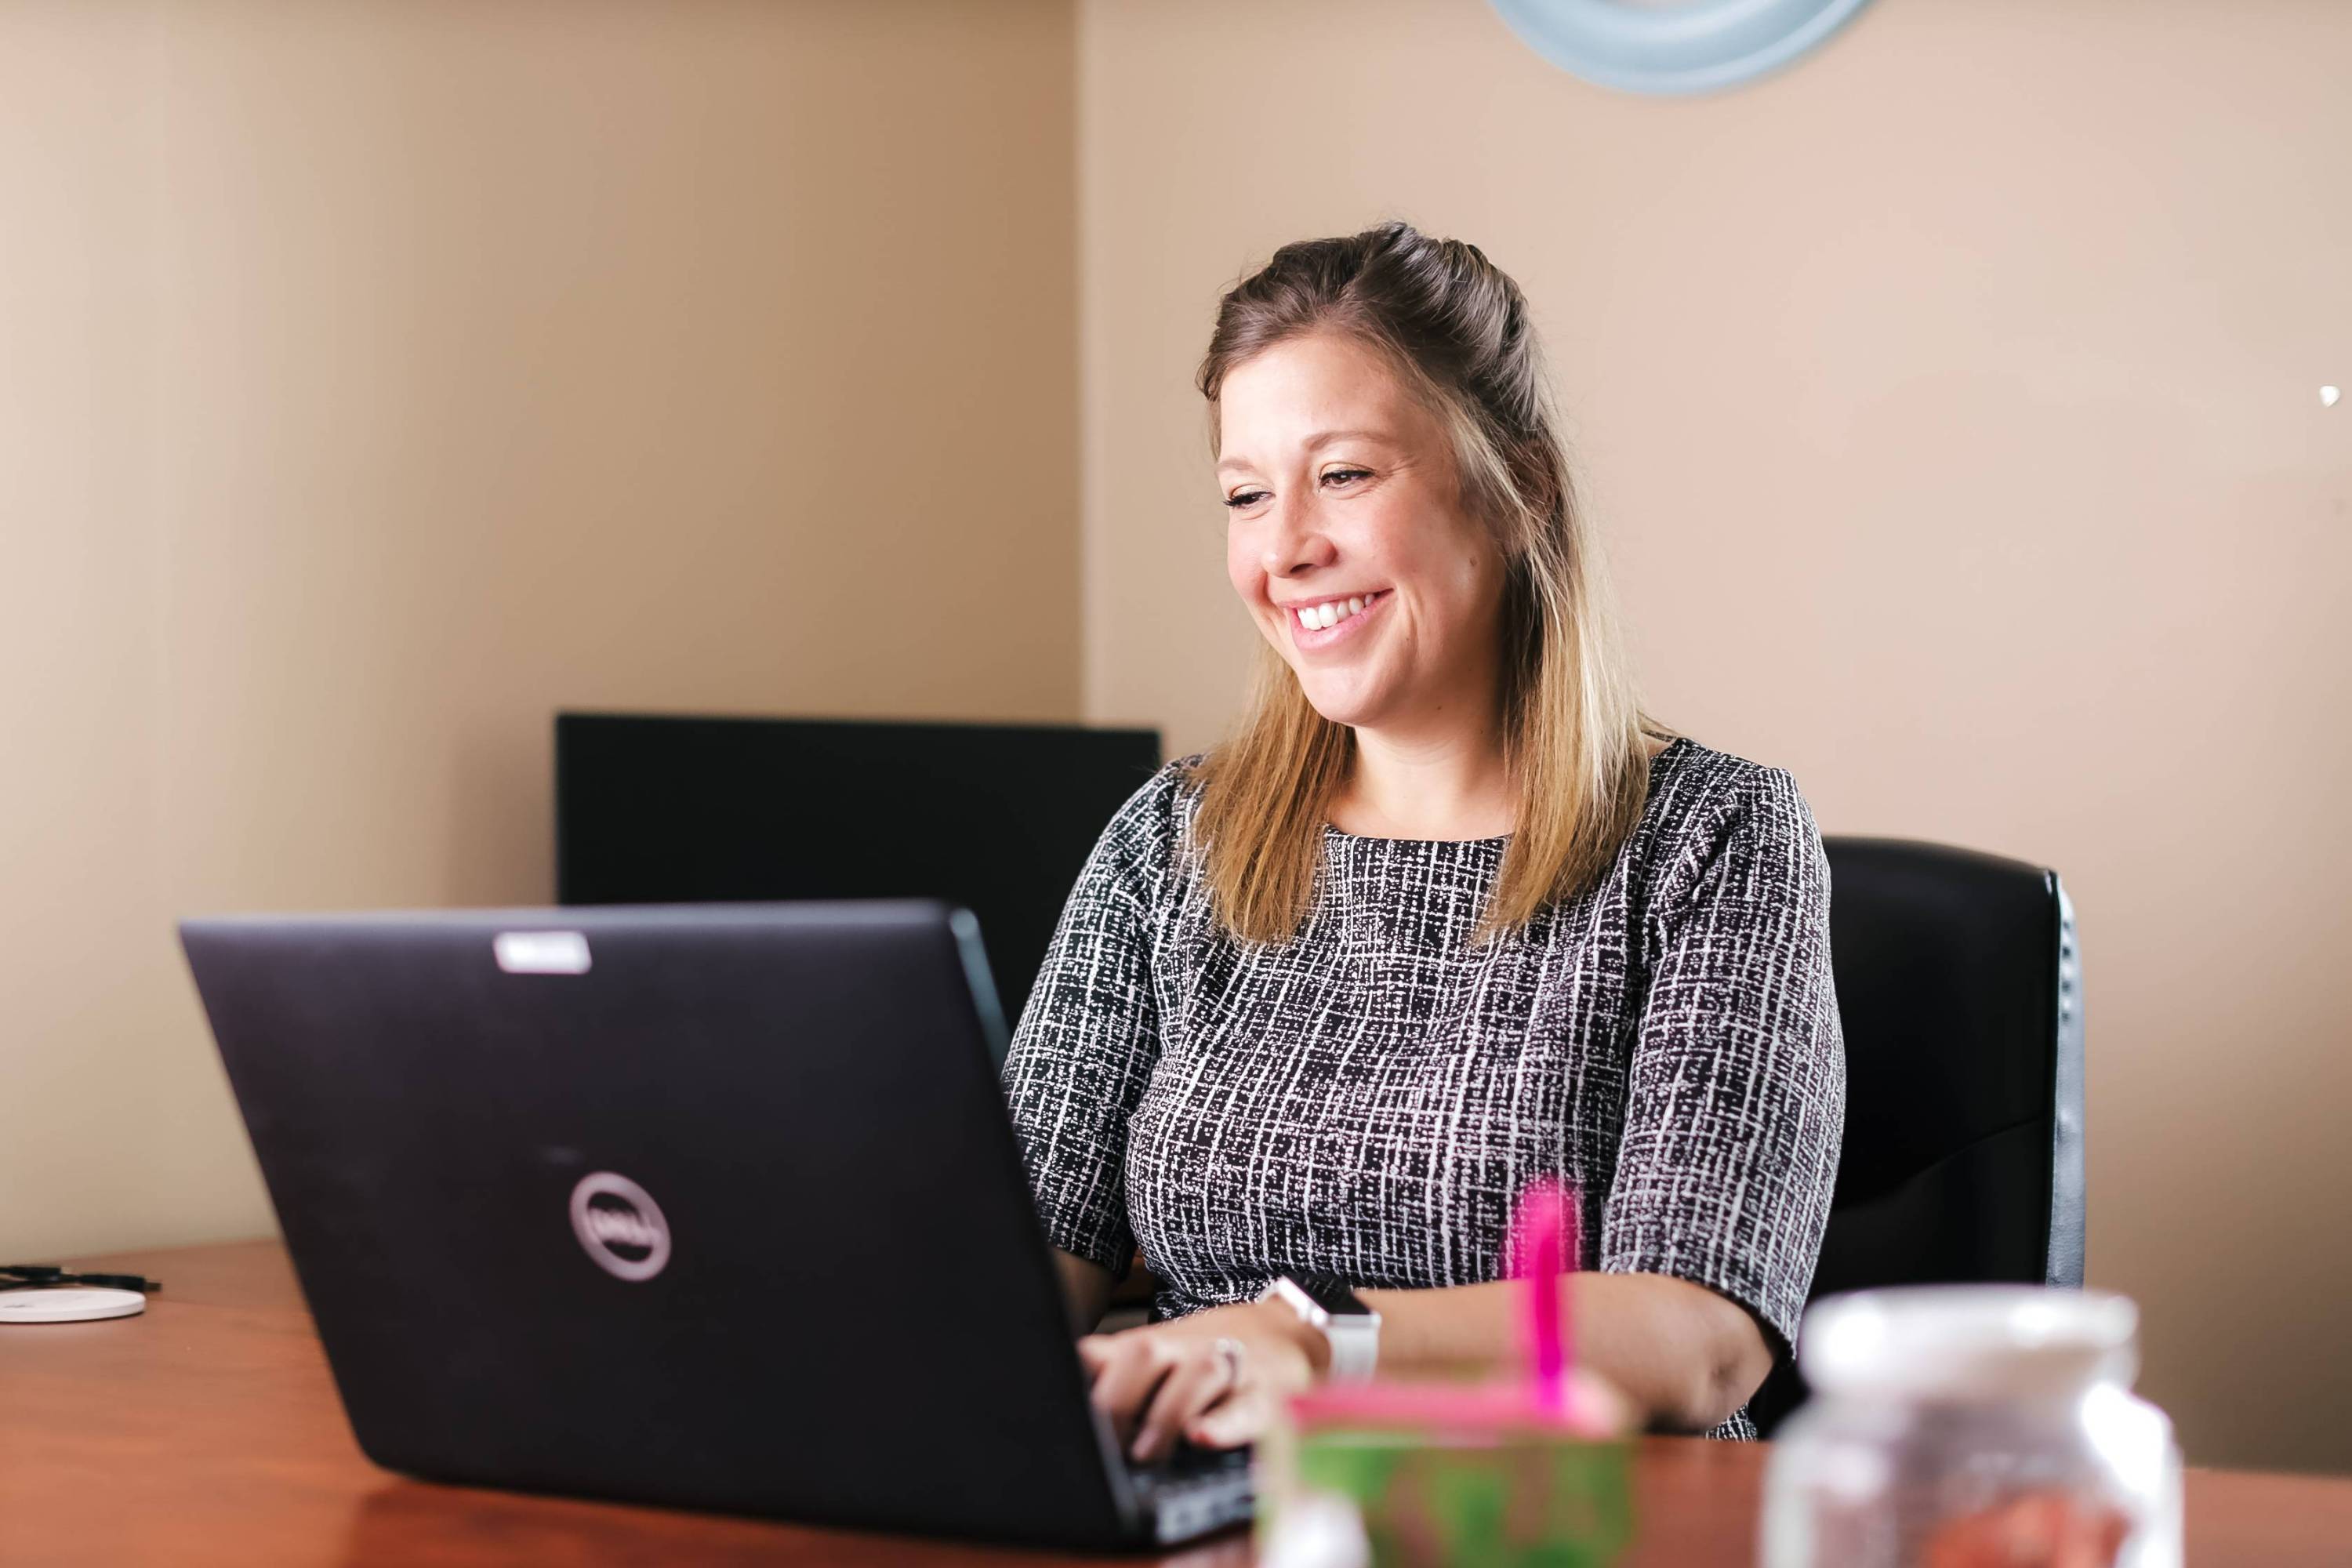 women setting in front of laptop smiling